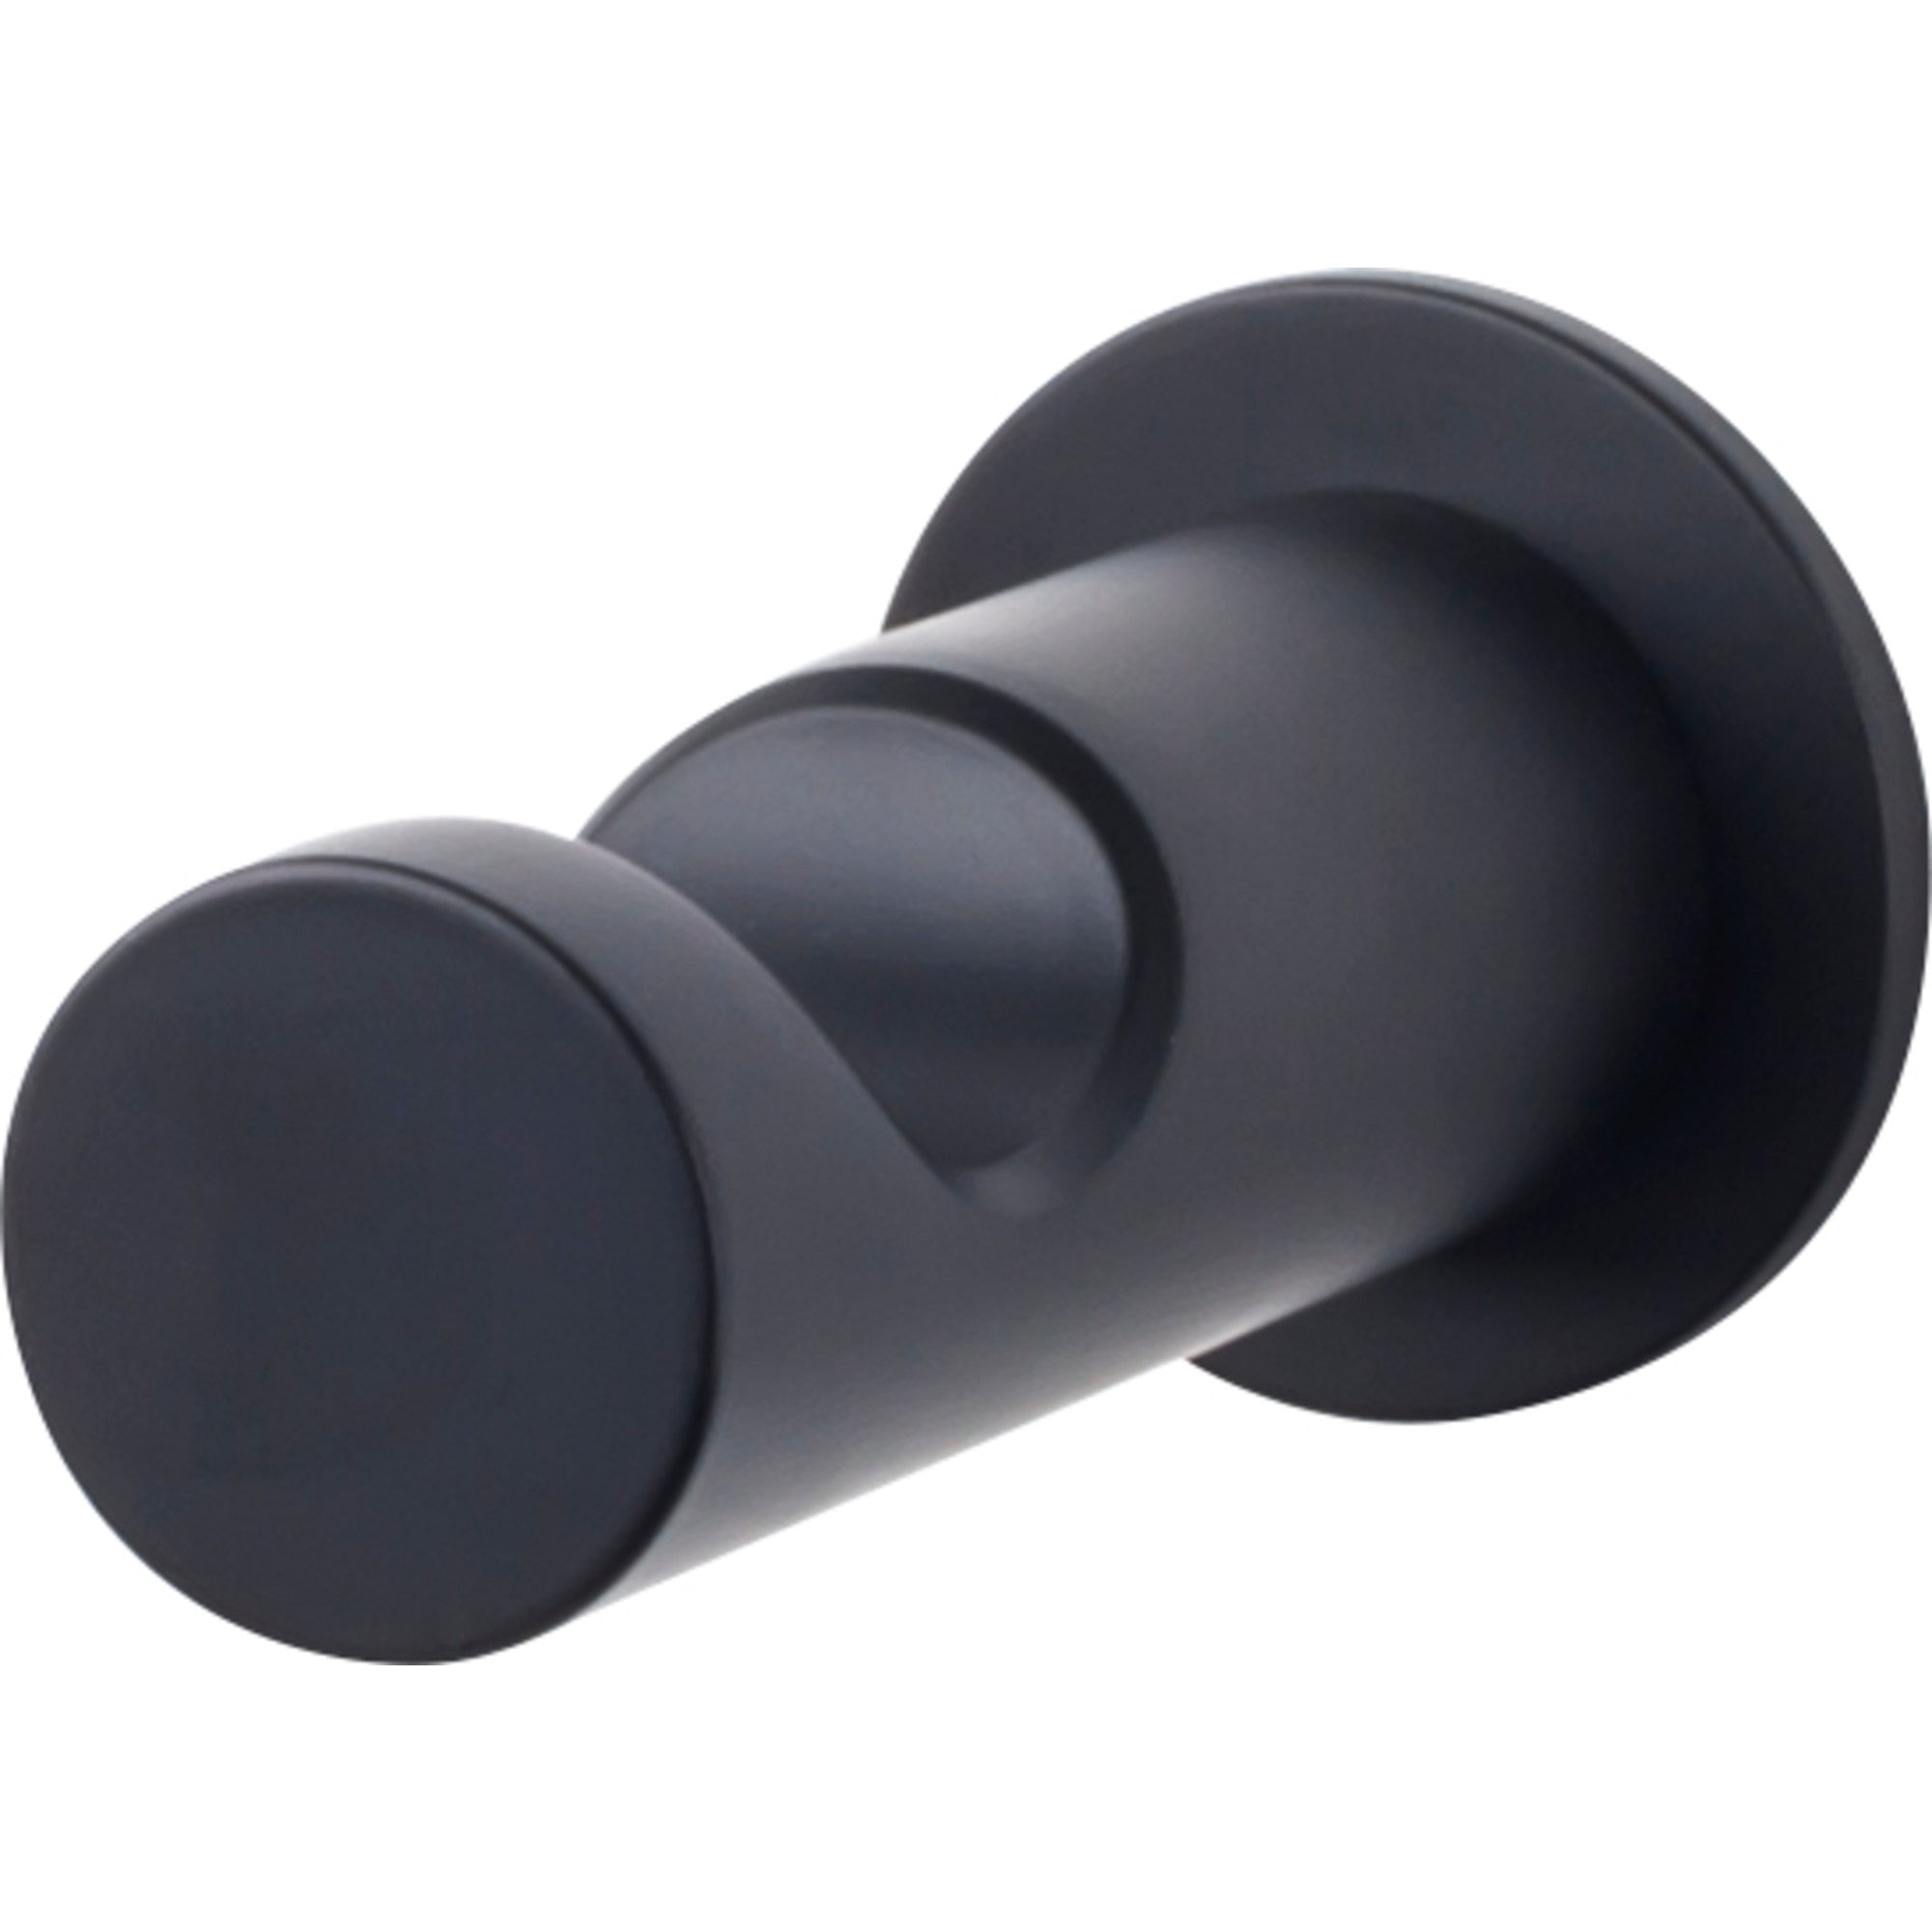 Top Knobs - Hardware - Hopewell Bath Single Hook - Oil Rubbed Bronze - Union Lighting Luminaires Décor